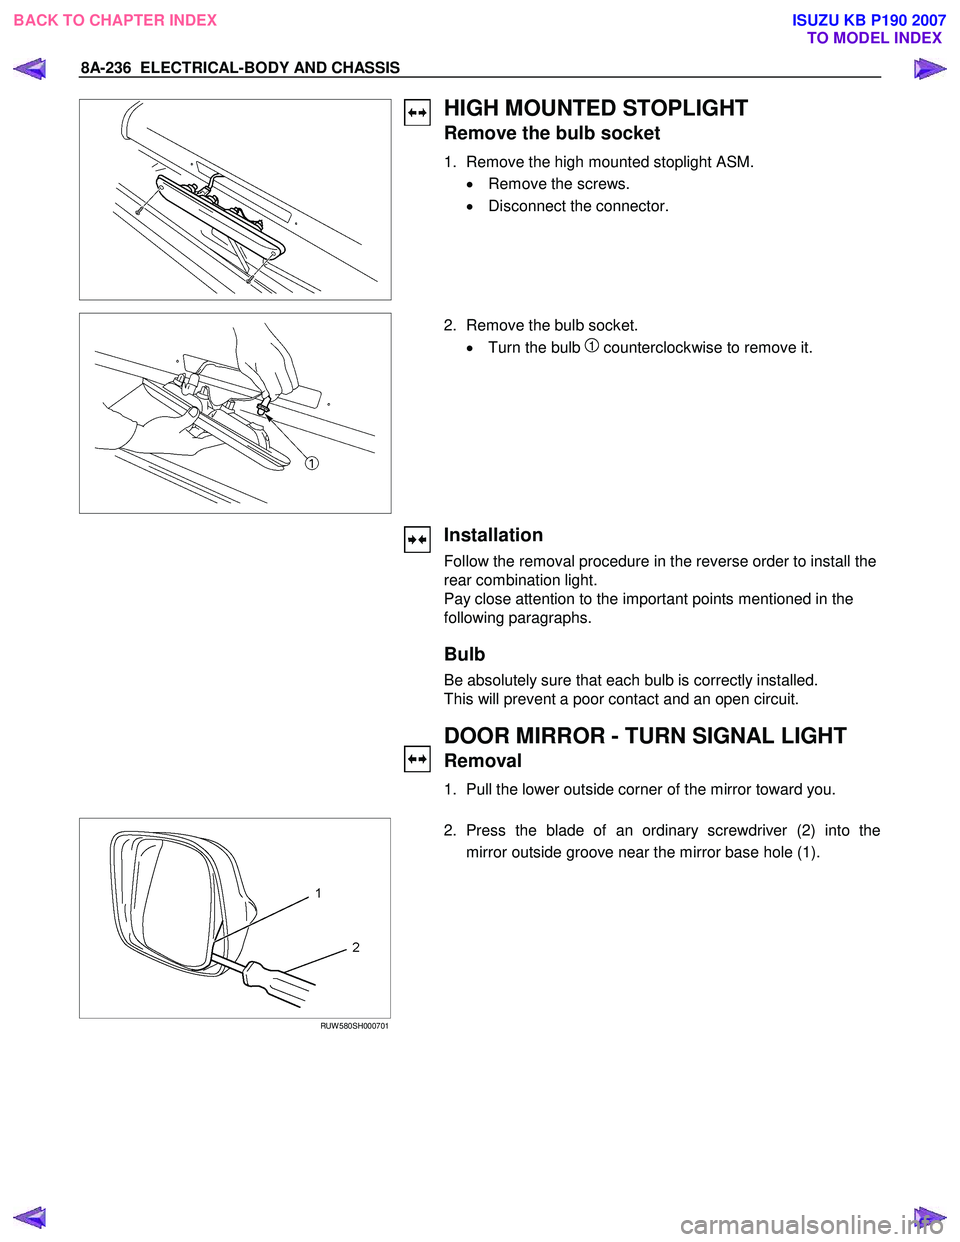 ISUZU KB P190 2007  Workshop Repair Manual 8A-236  ELECTRICAL-BODY AND CHASSIS 
HIGH MOUNTED STOPLIGHT 
Remove the bulb socket 
1.  Remove the high mounted stoplight ASM. •  Remove the screws.  
•   Disconnect the connector. 
 
2.  Remove 